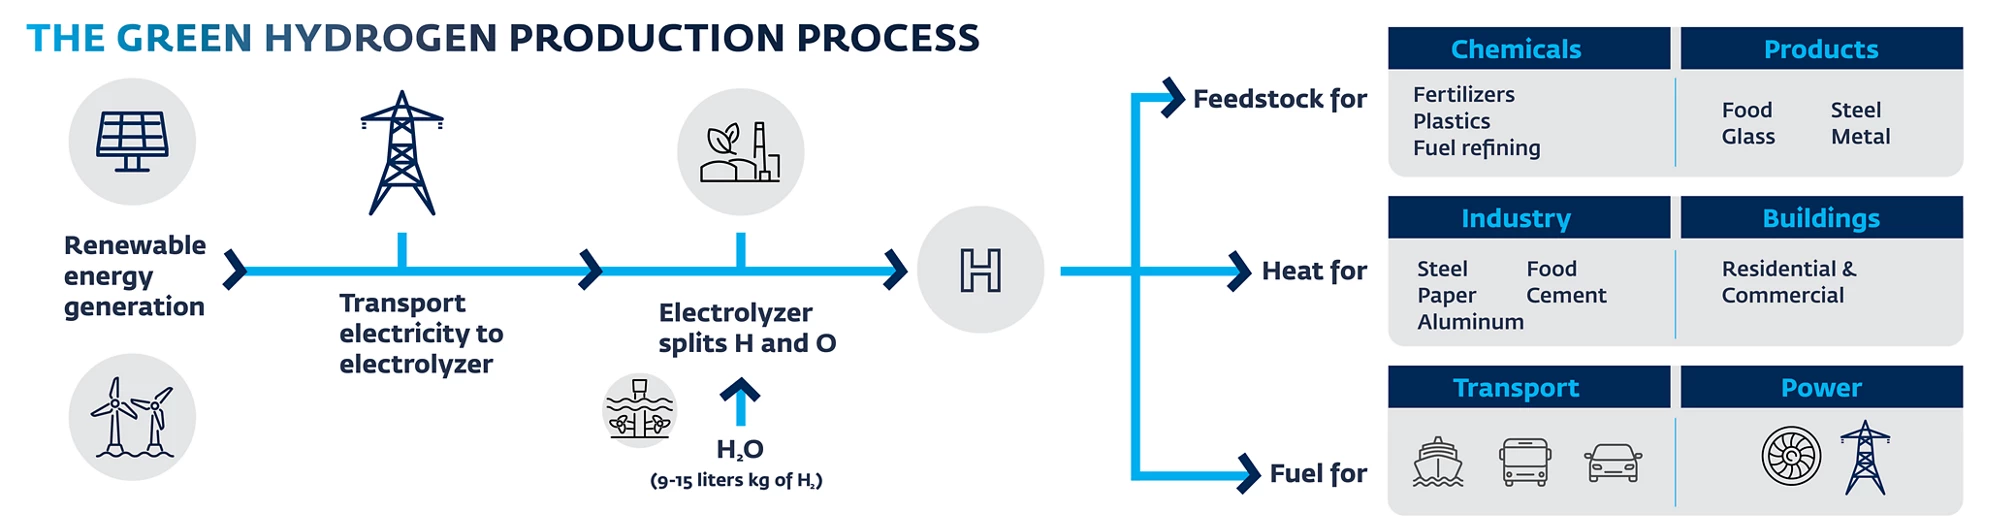 The green hydrogen production process